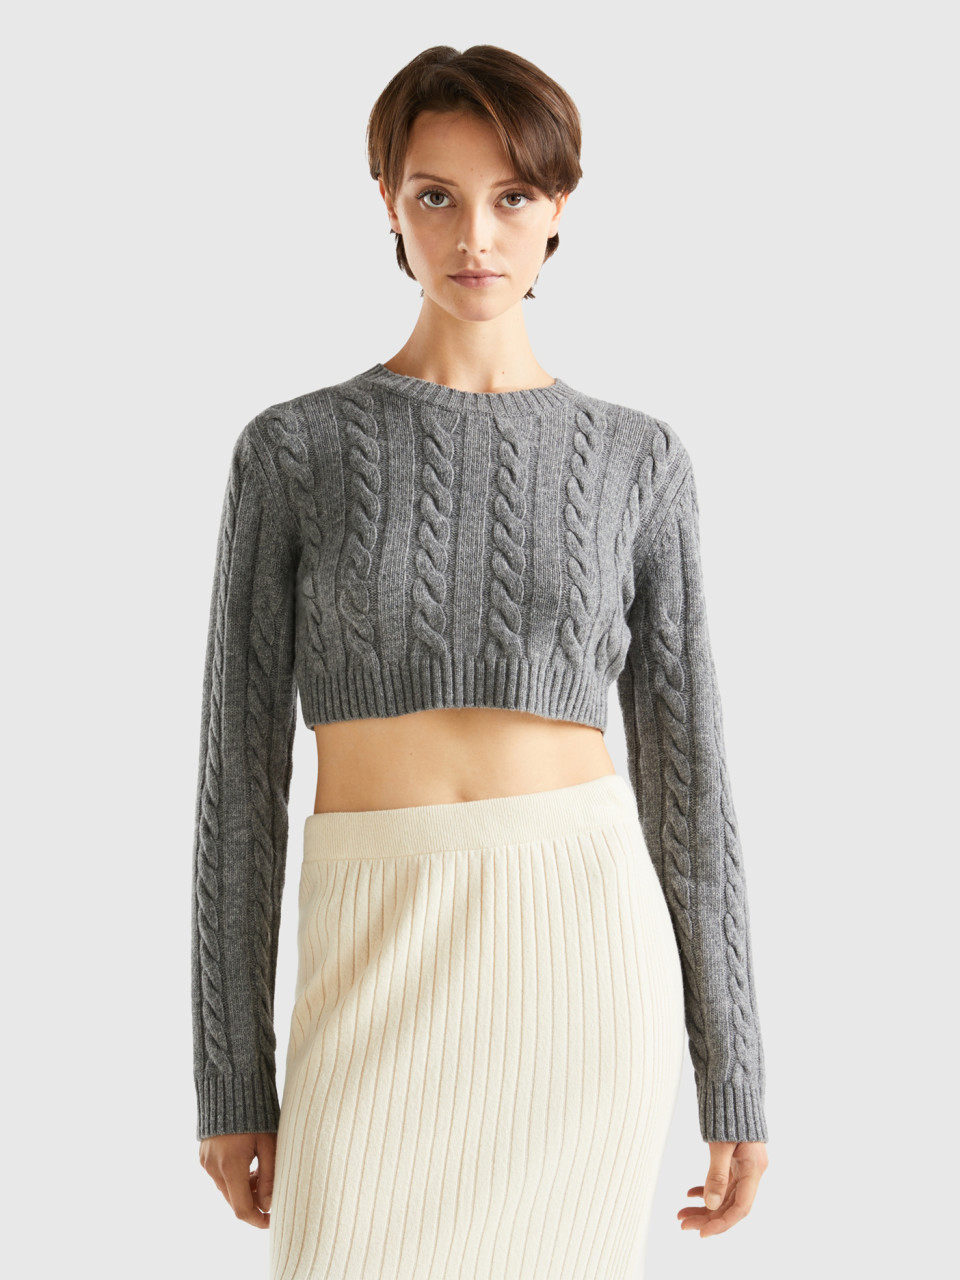 Benetton, Cropped Sweater With Cables, Dark Gray, Women